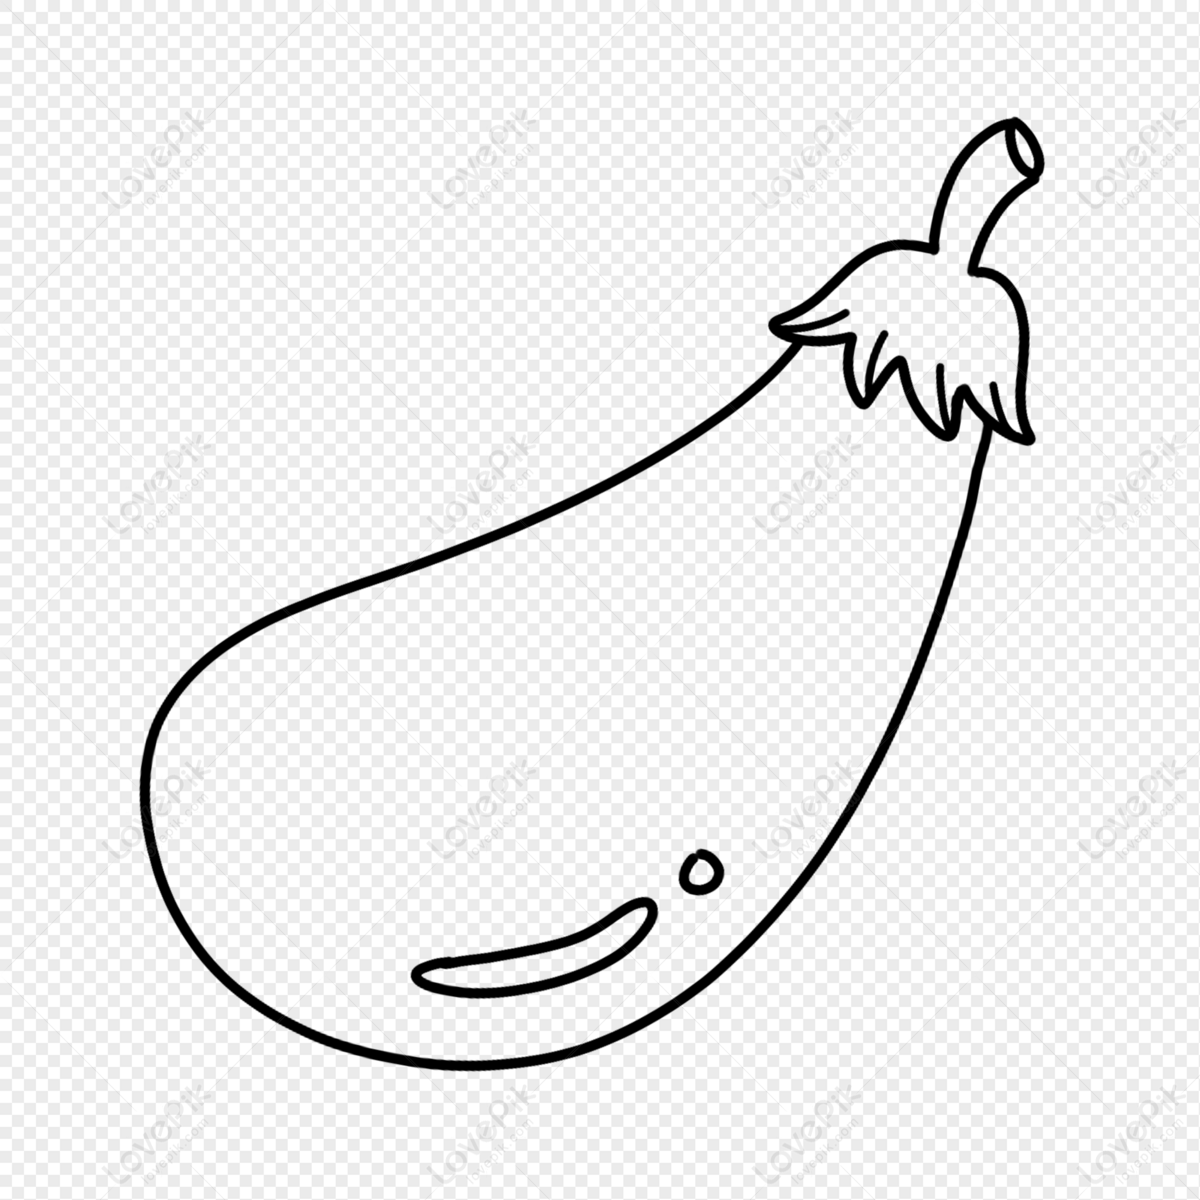 Face Of A Cartoon Pear With Ears Outline Sketch Drawing Vector, Car Drawing,  Cartoon Drawing, Wing Drawing PNG and Vector with Transparent Background  for Free Download